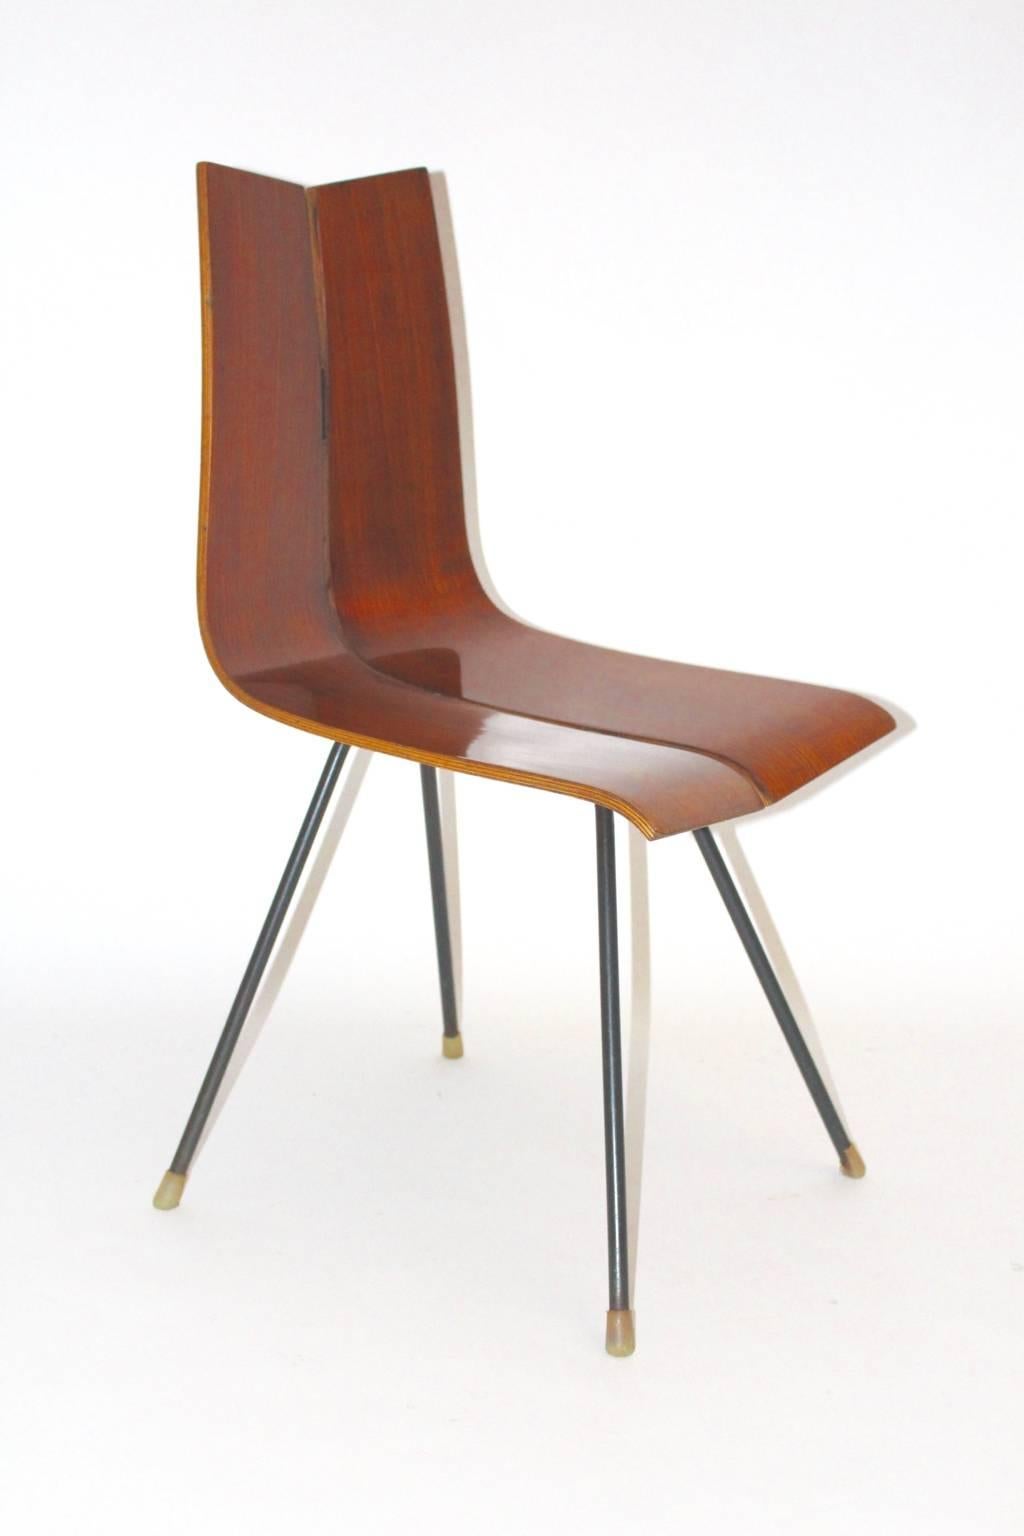 Mid Century Modernn chair or side chair designed by Hans Bellmann, circa 1955. 
Manufactured by Horgen-Glarus, Switzerland
The GA chair is made of a black lacquered tube steel base, while the seat shell made from plywood teak veneered.
The surface